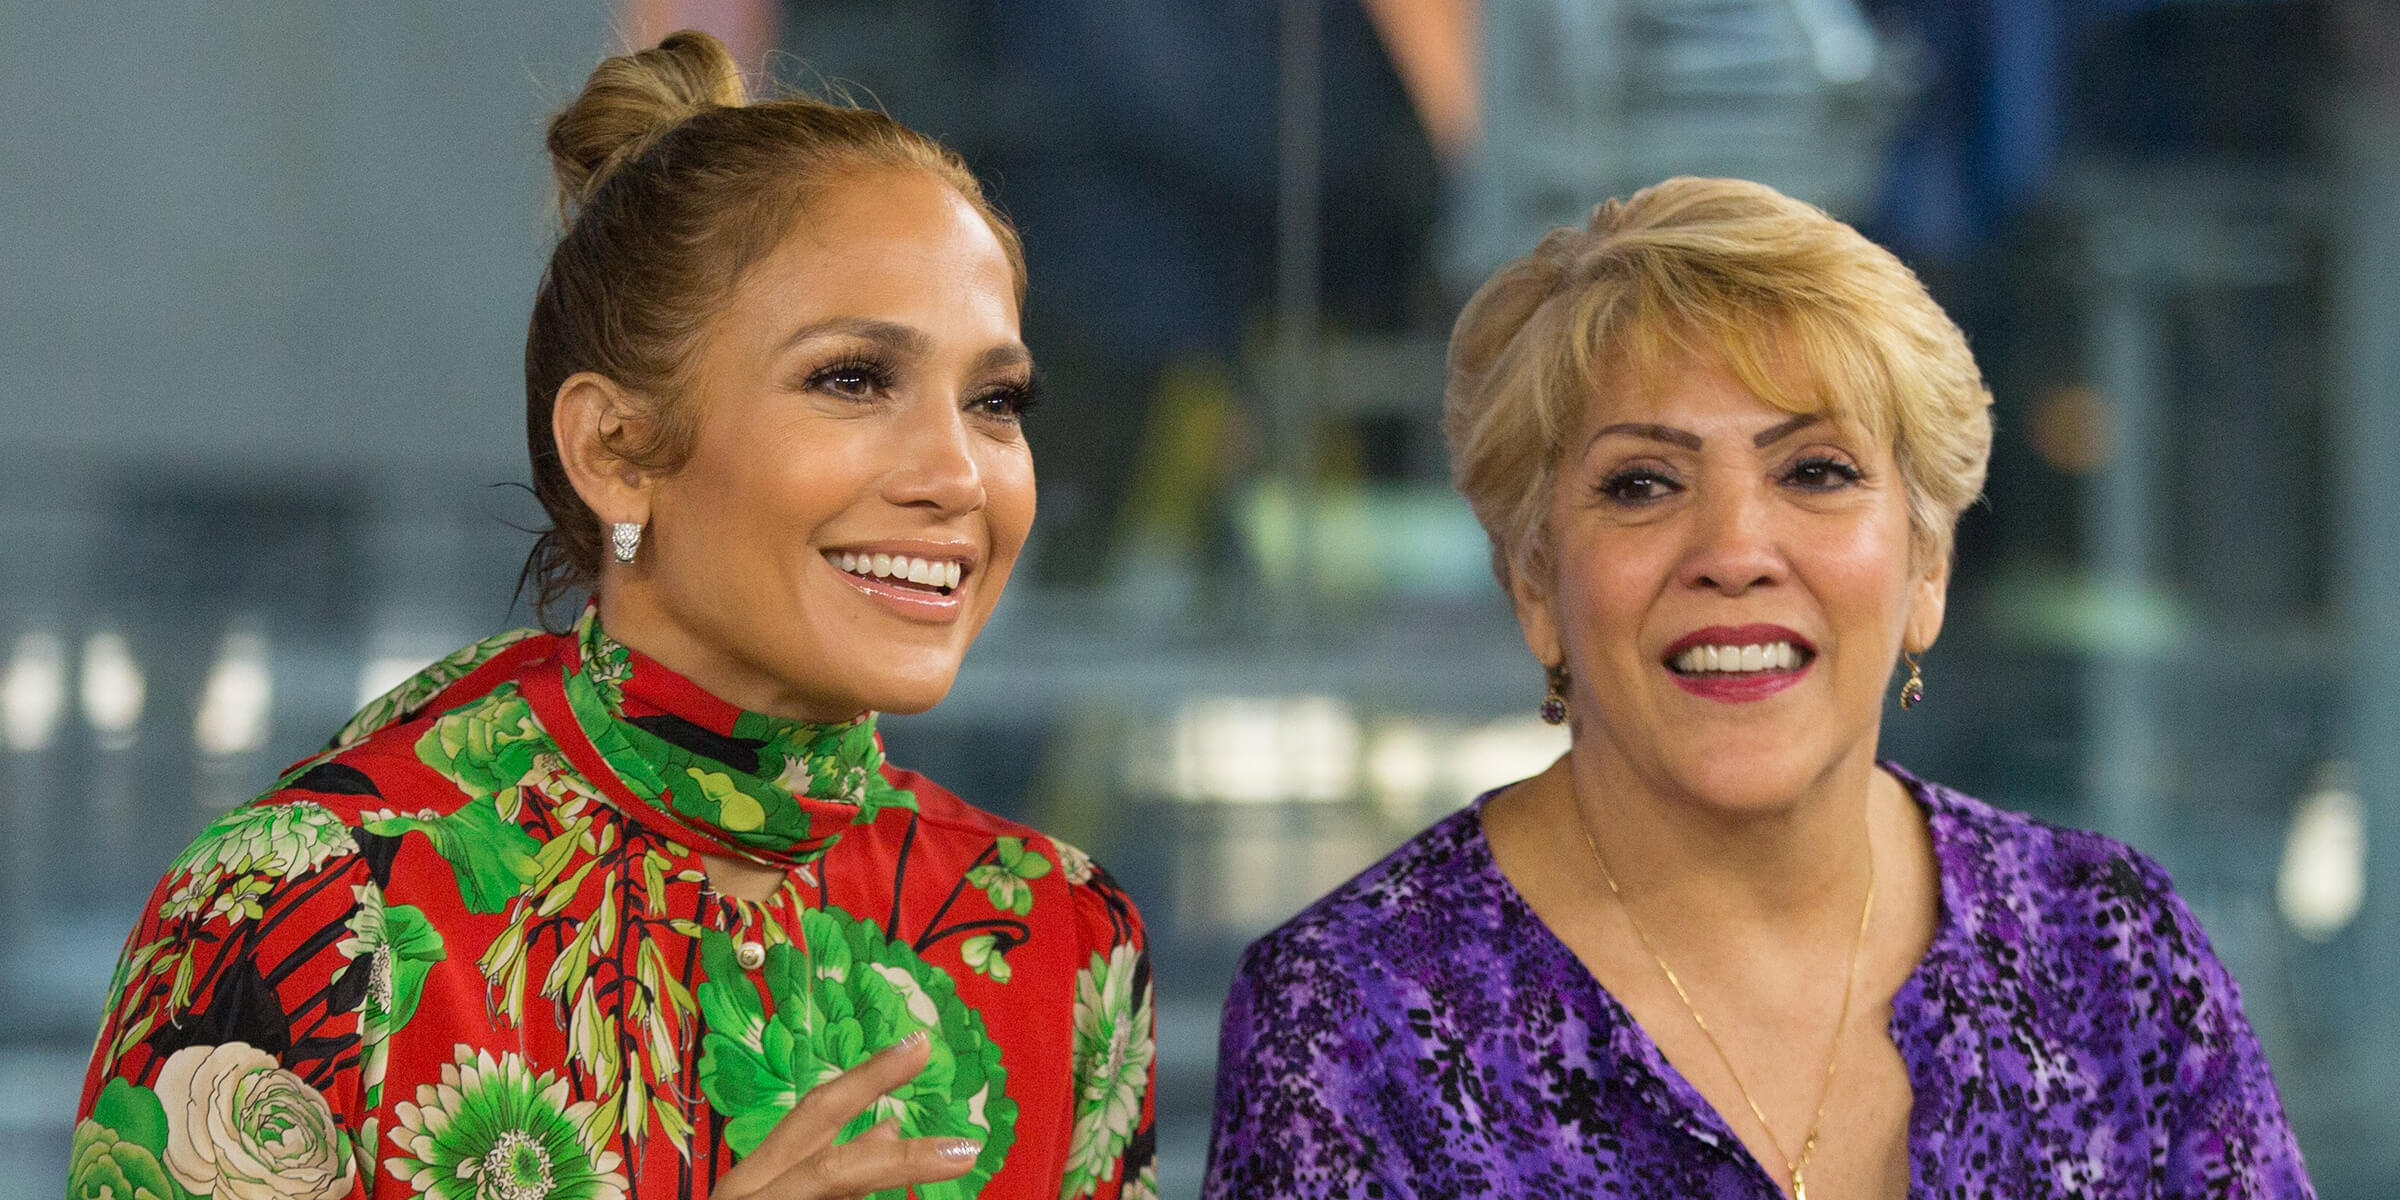 She Beat the Sh*t Out of Me': Fans React to Jennifer Lopez Revealing Her Mom  Guadalupe Rodriguez Abused Her as a Kid - Animated Times